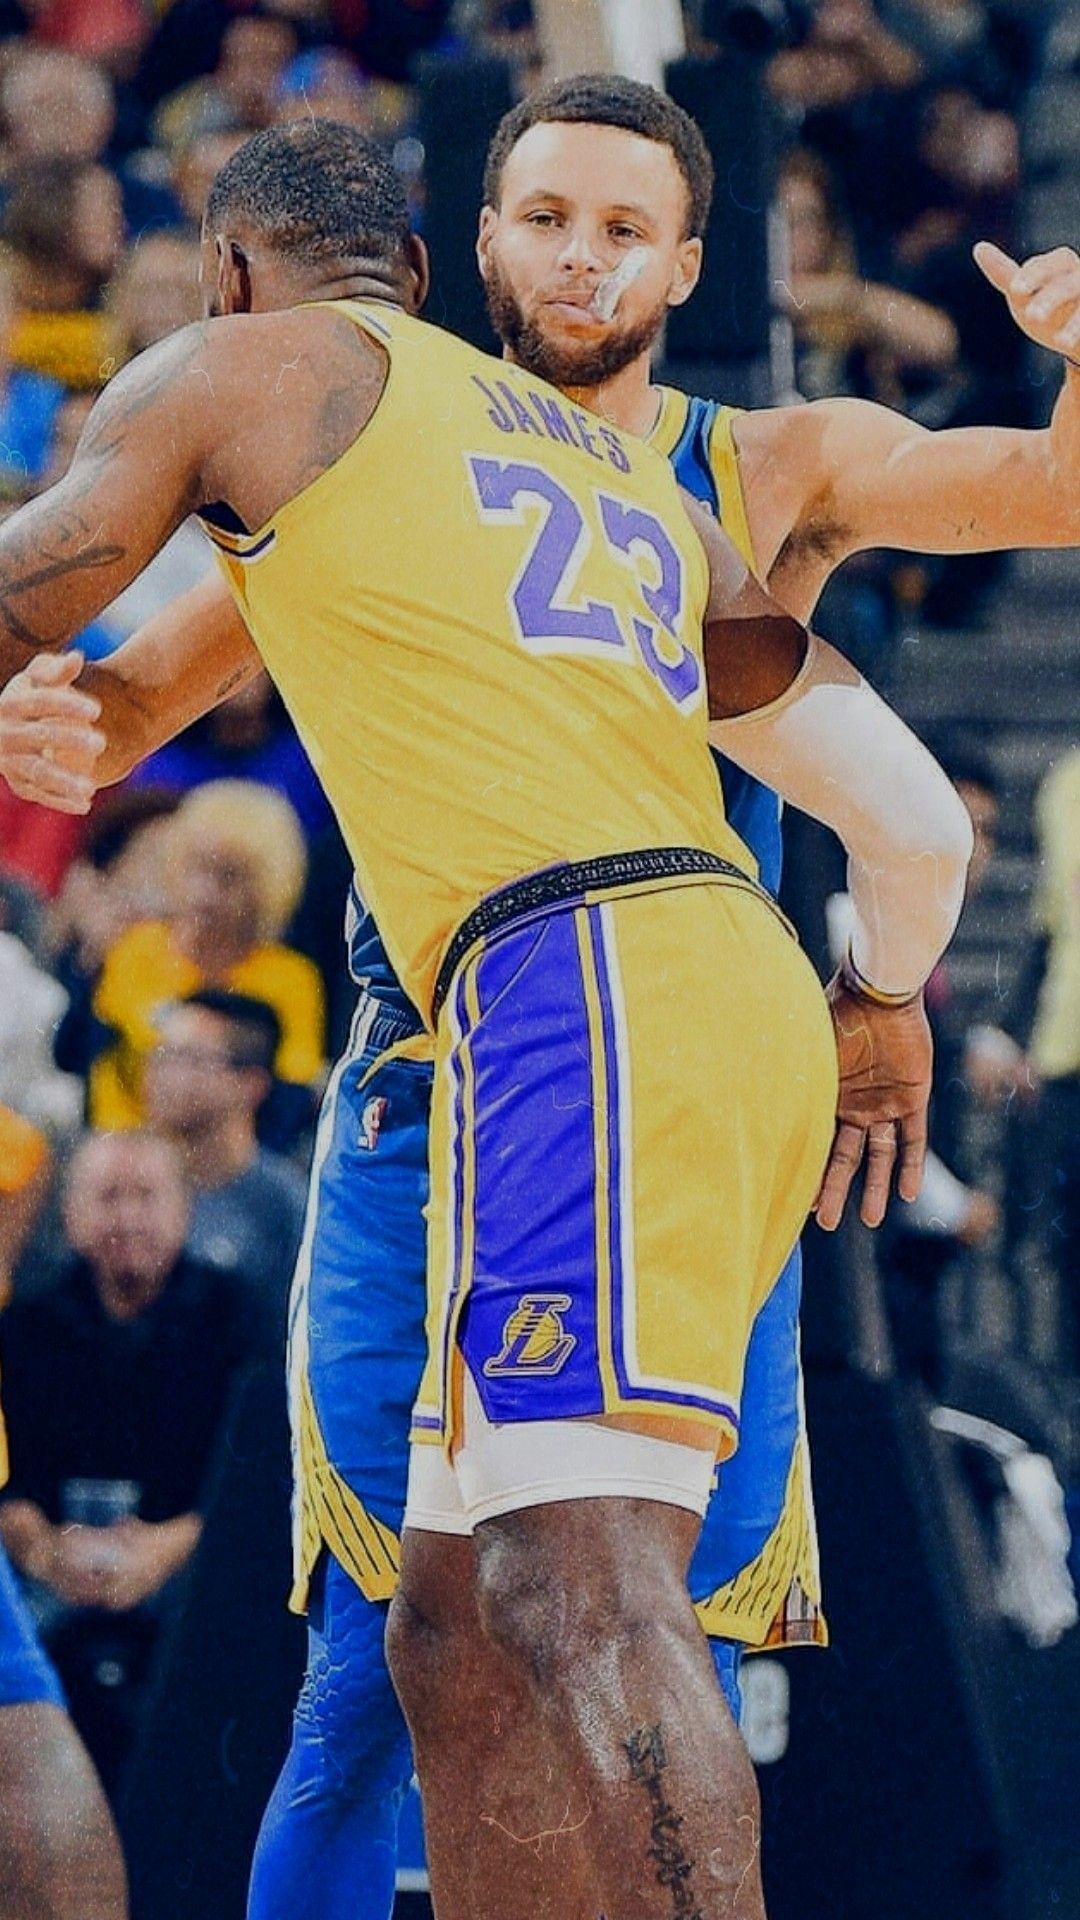 STEPHEN CURRY AND LEBRON JAMES WALLPAPER. Lebron james